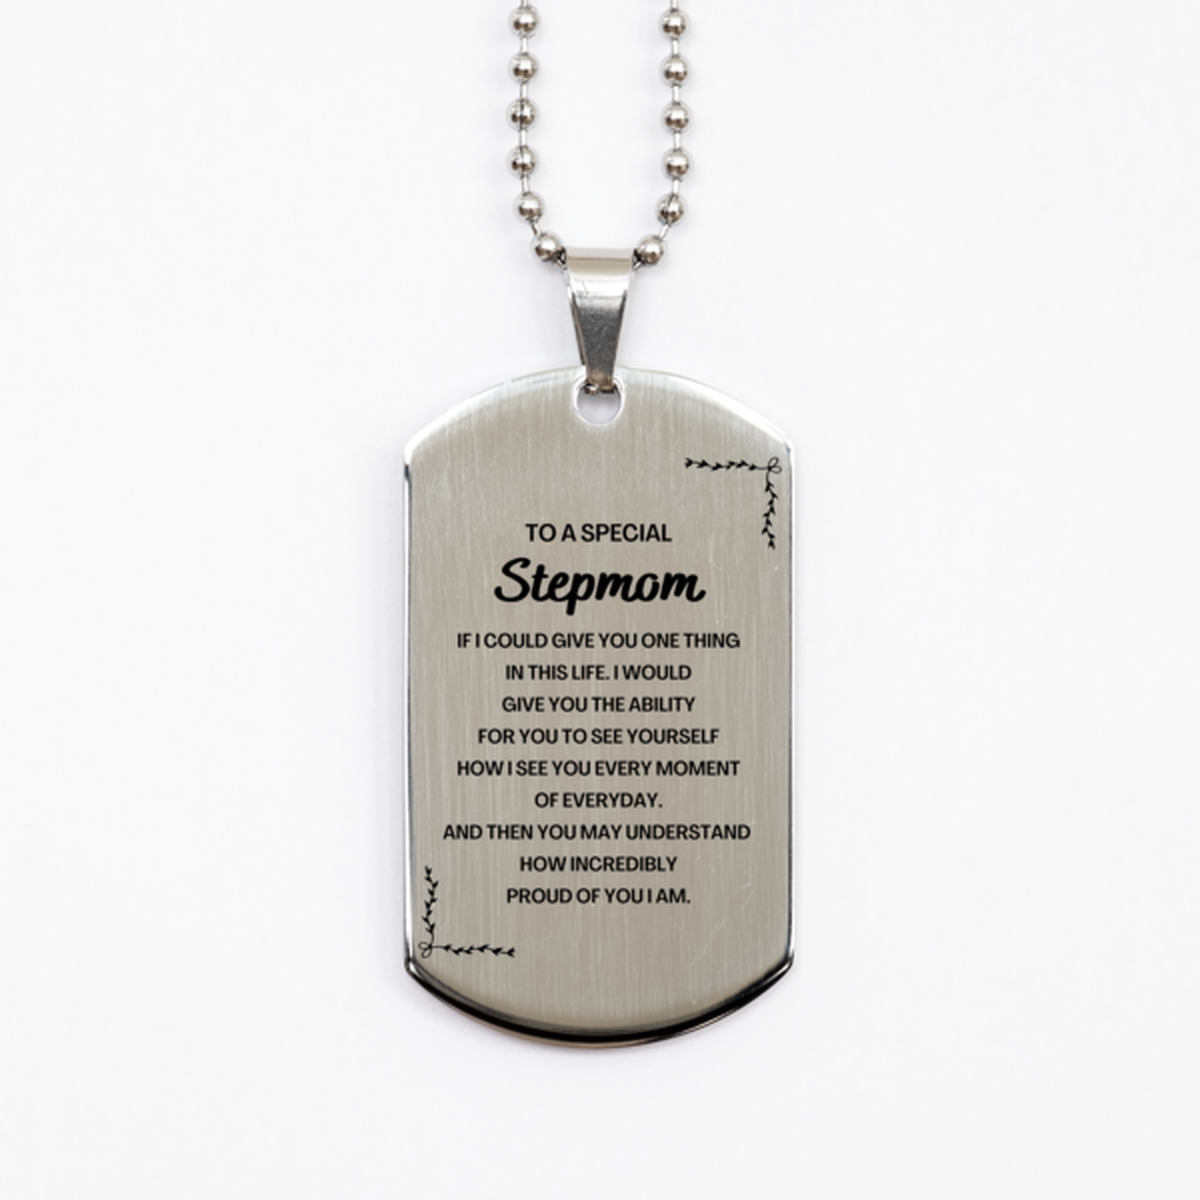 To My Stepmom Silver Dog Tag, Gifts For Stepmom Engraved, Inspirational Gifts for Christmas Birthday, Epic Gifts for Stepmom To A Special Stepmom how incredibly proud of you I am